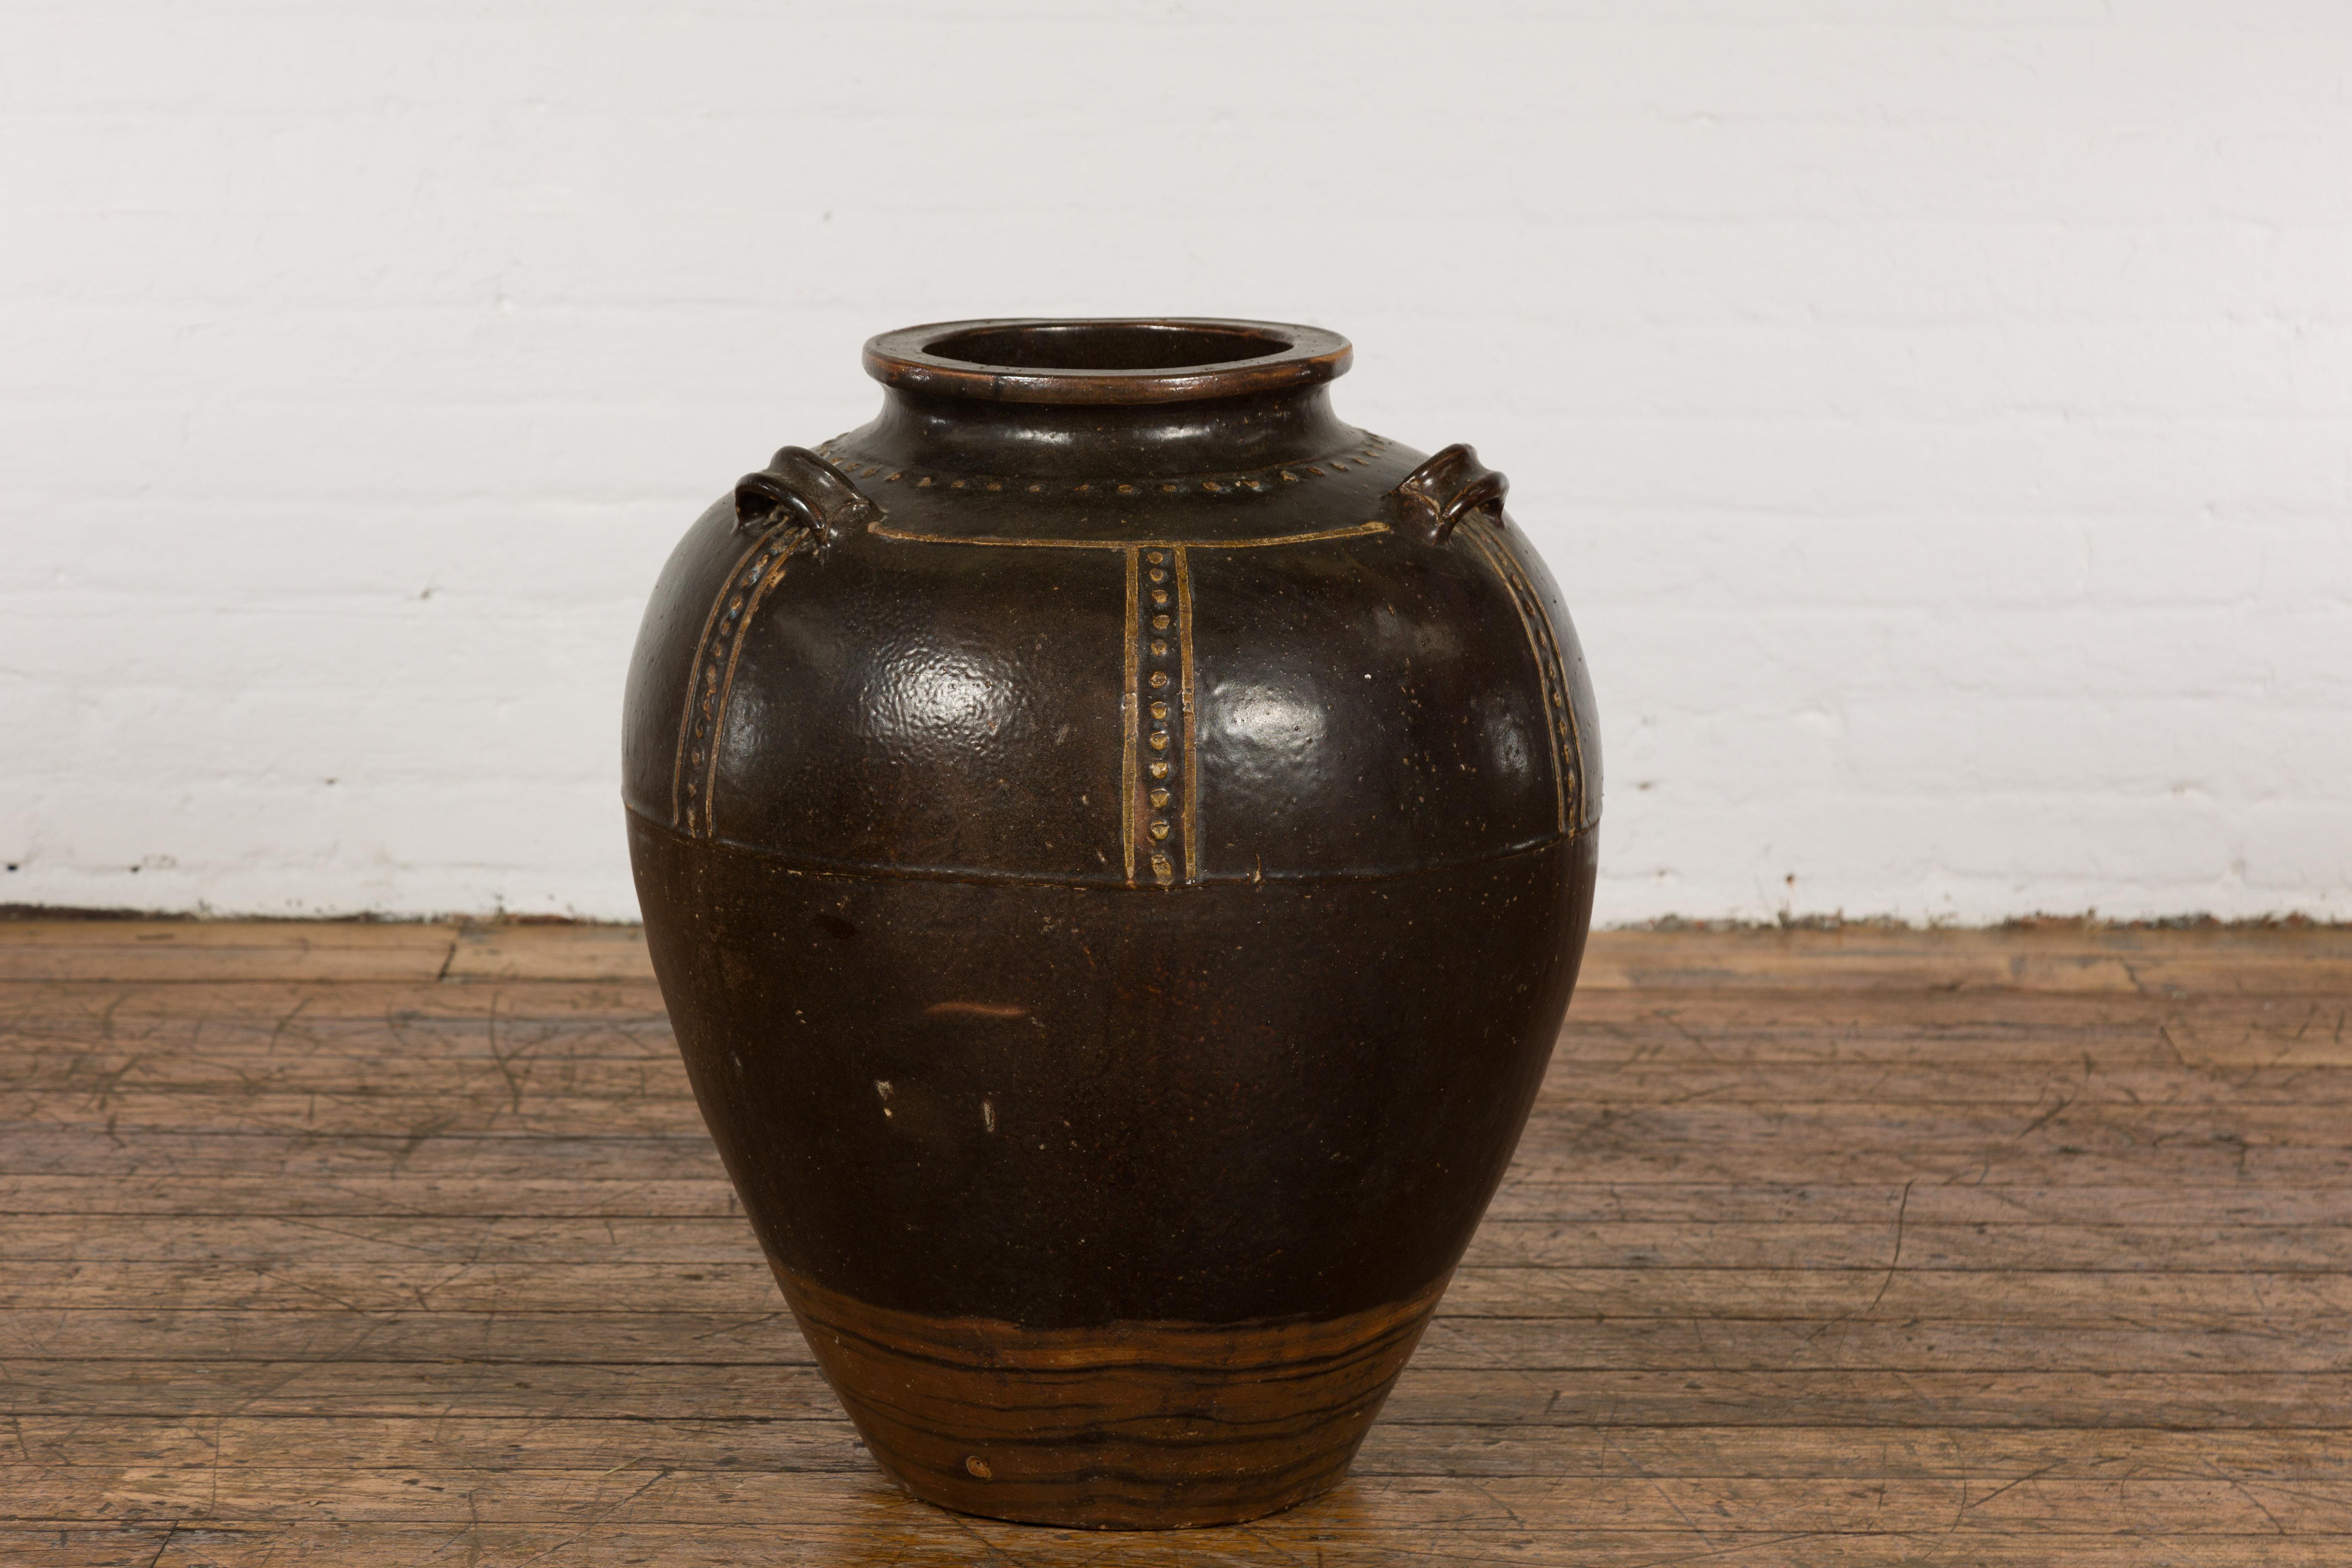 An antique Thai brown glazed ceramic vase from the early 20th century with petite loop handles, cream colored dotted décor, tapering lines and lighter brown accentuation. Experience a dash of Southeast Asian artistry with this charming antique Thai